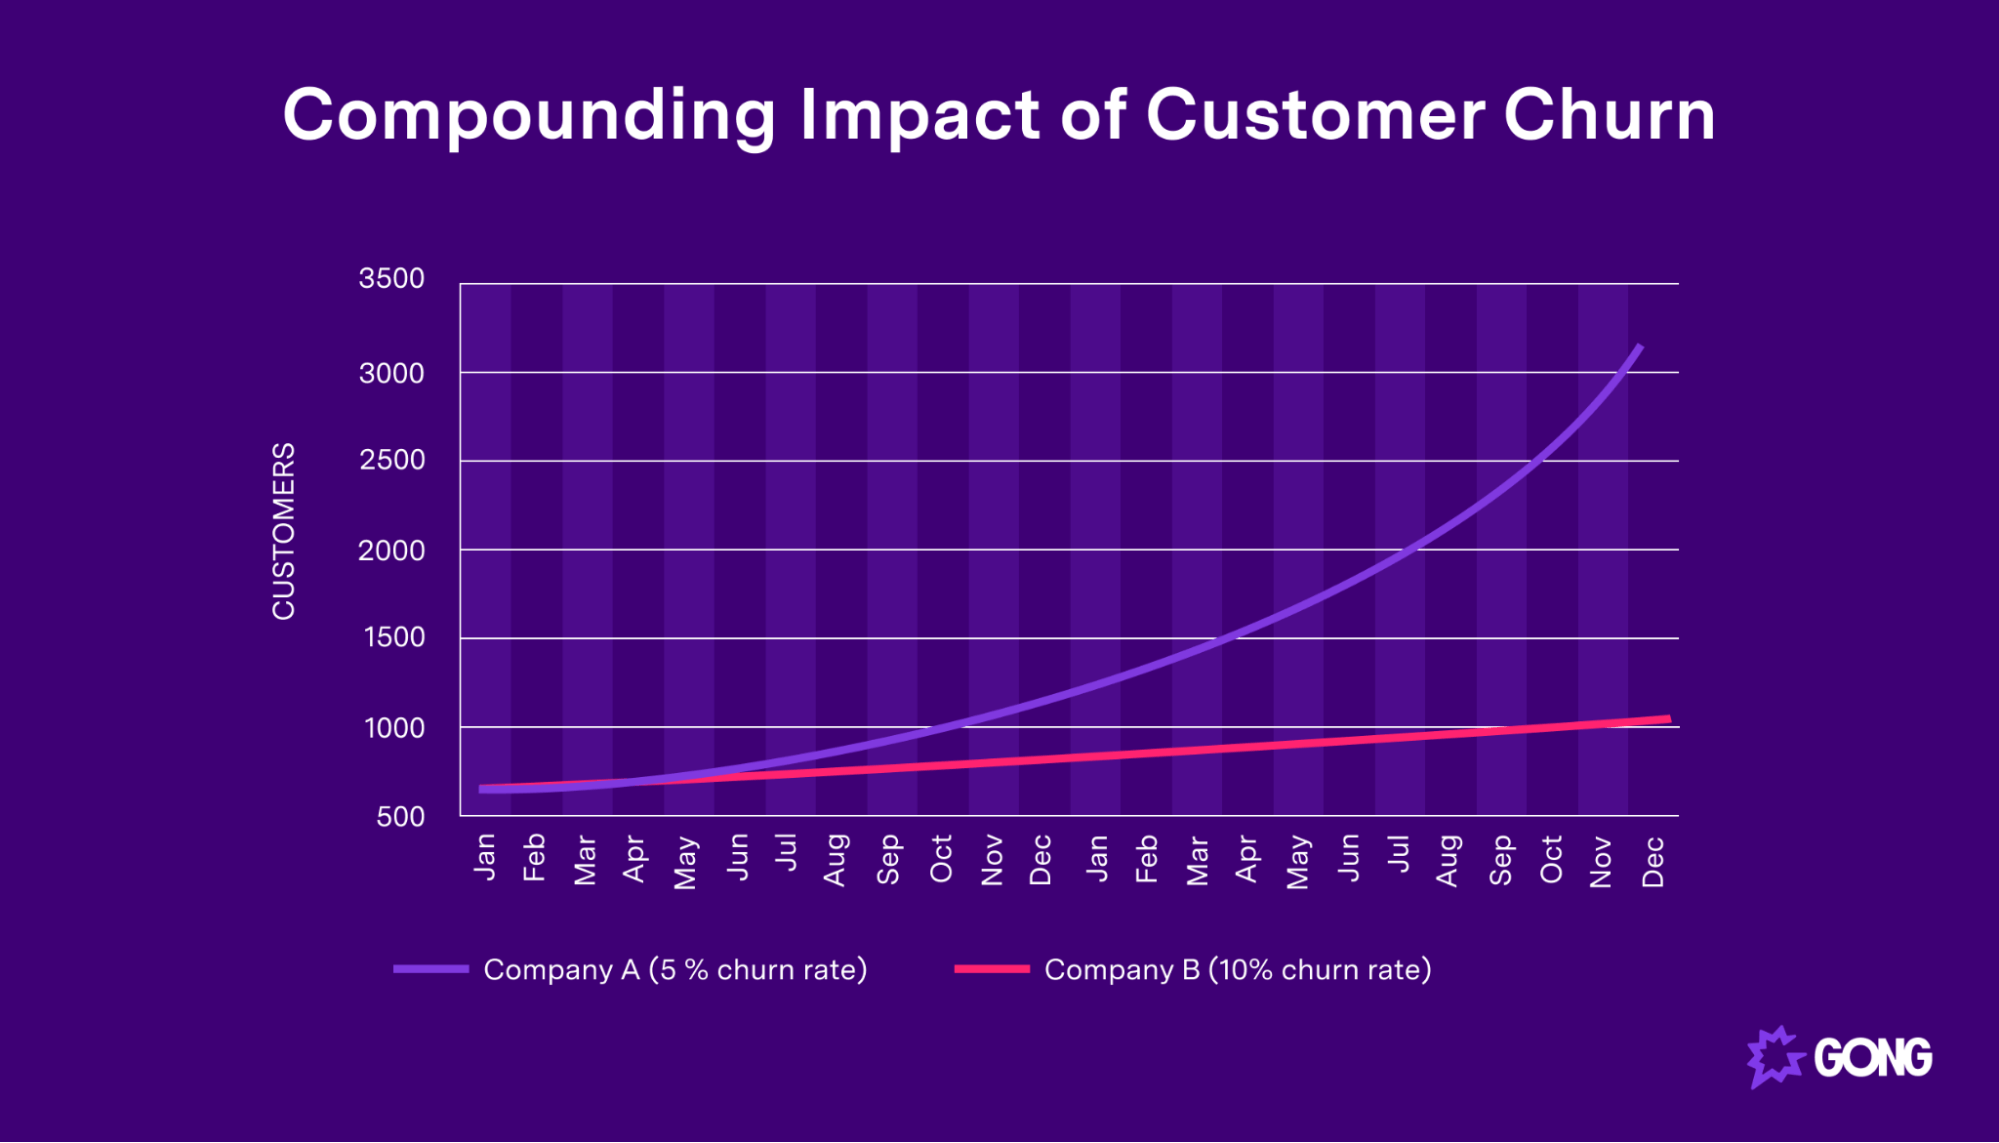 The compounding impact of customer churn